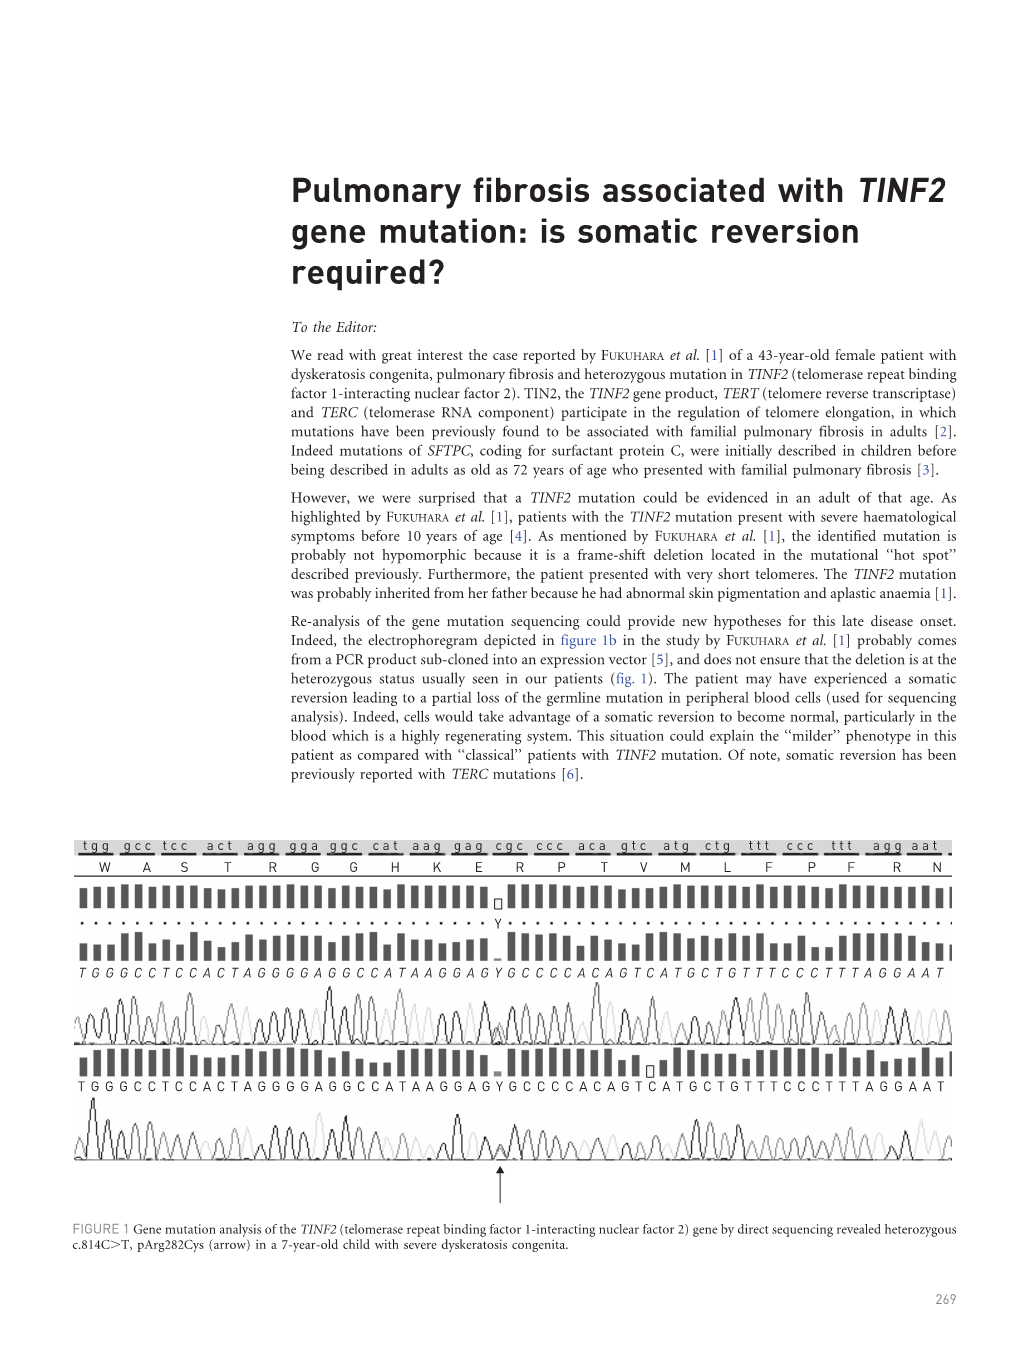 Pulmonary Fibrosis Associated with TINF2 Gene Mutation: Is Somatic Reversion Required?